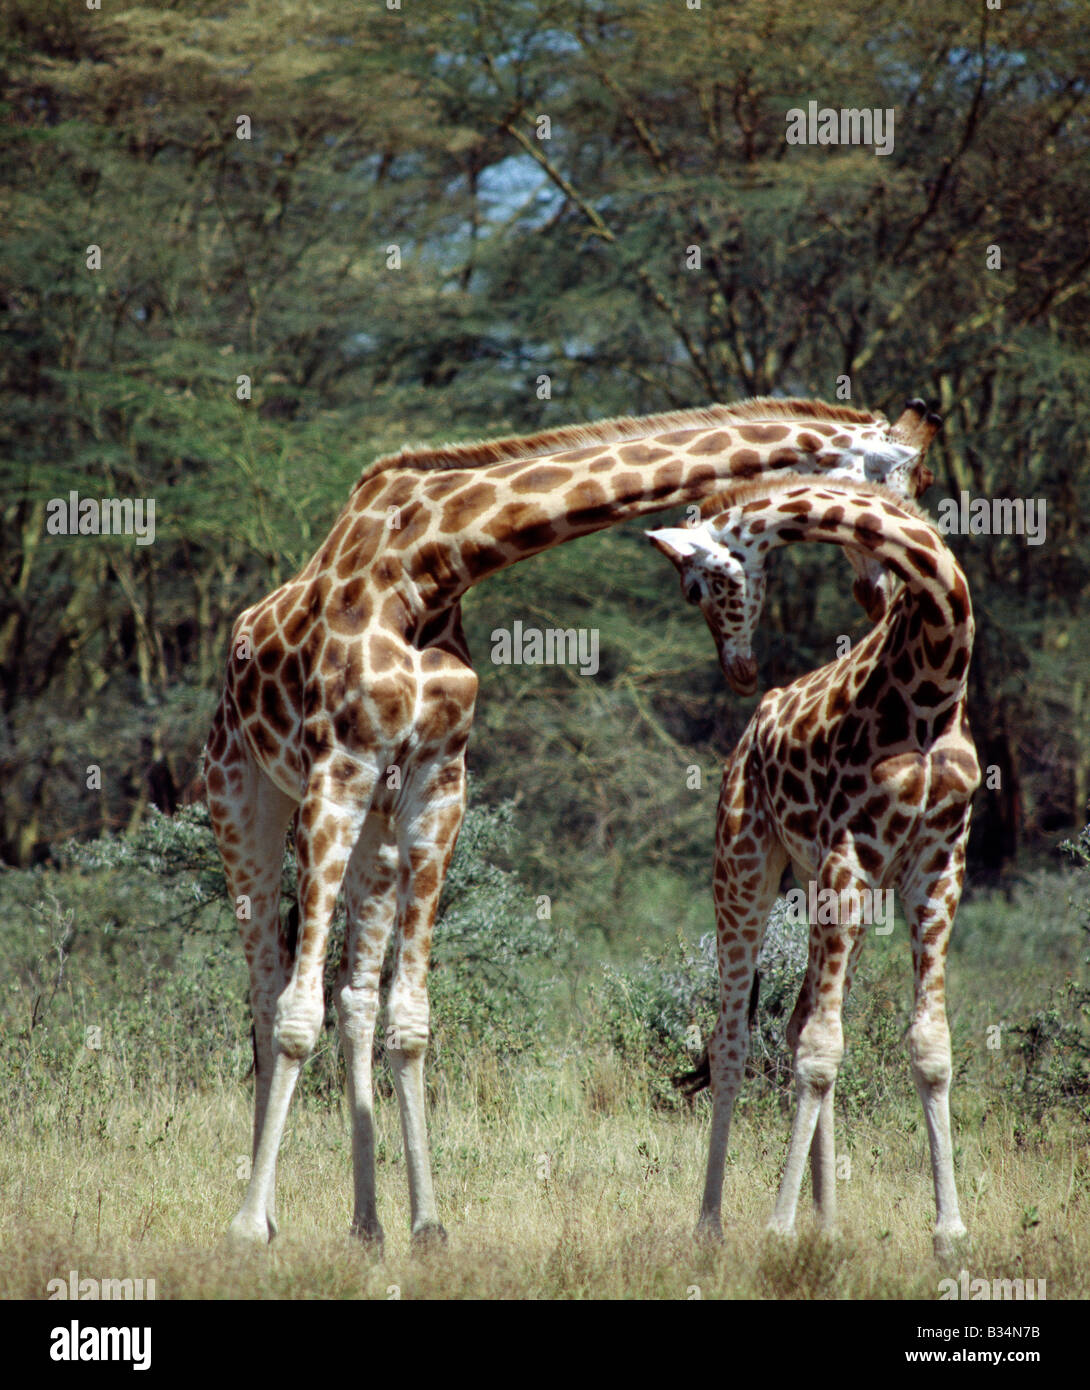 Kenya, Rift Valley Province, Lake Nakuru National Park. Two Rothschild giraffes 'neck' in Lake Nakuru National Park. Necking is a contest of strength and dominance undertaken by adult males or young giraffes, which stand shoulder to shoulder and aim arching blows to each other's head. . Stock Photo